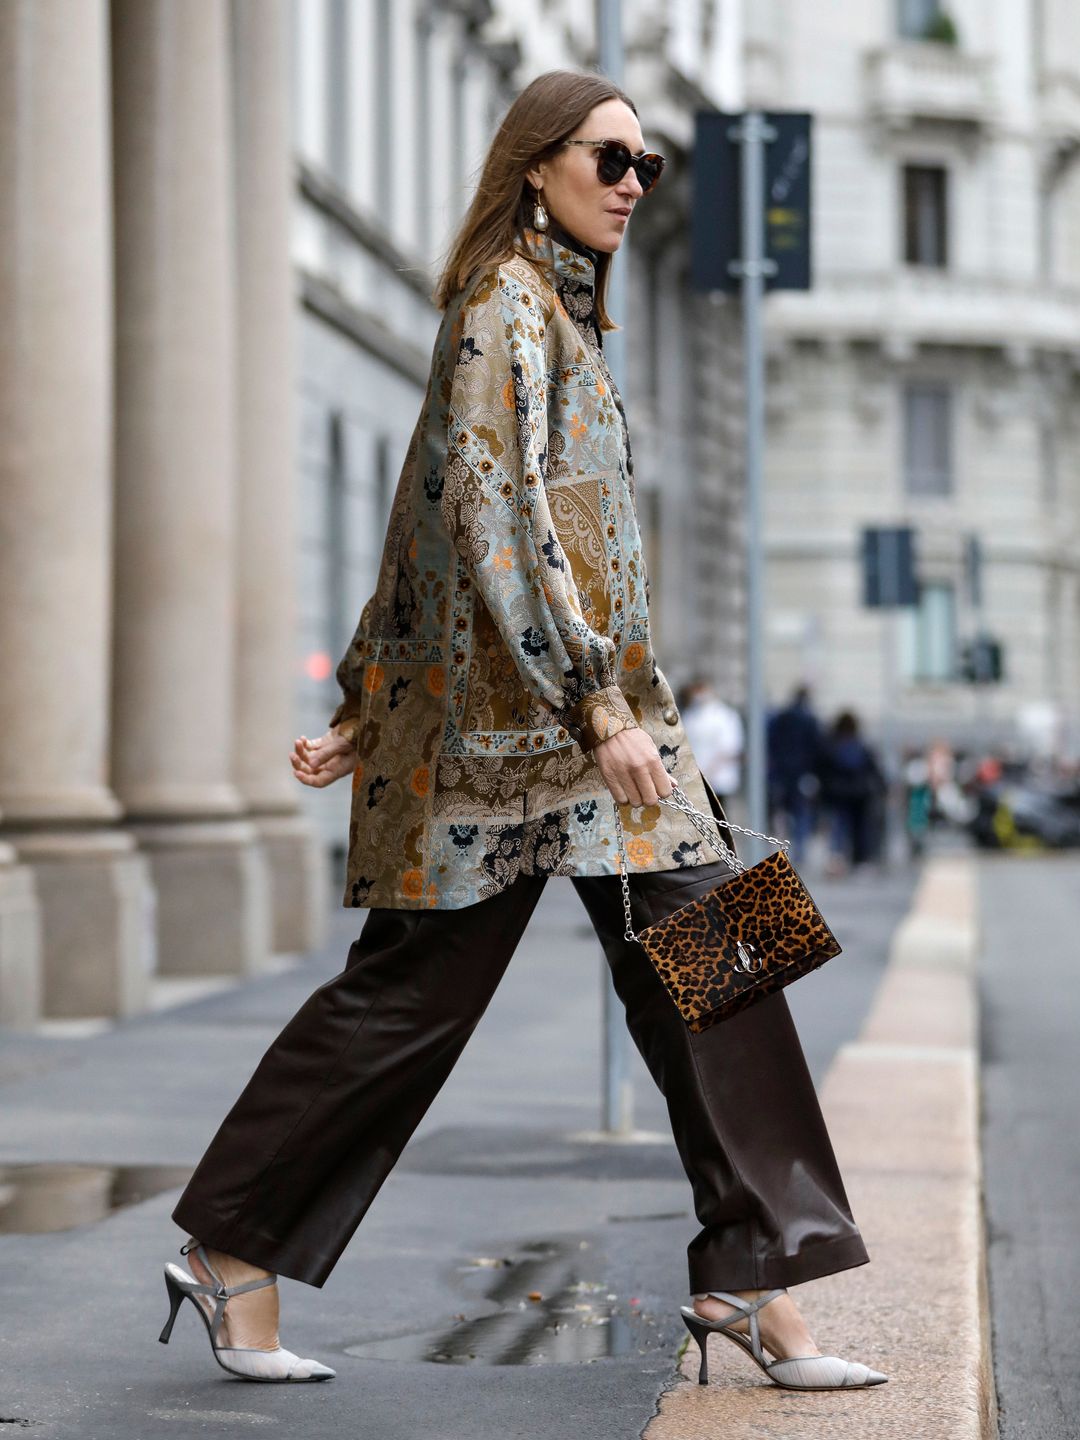 Annette Weber wears brown leather trousers and a floral tunic 